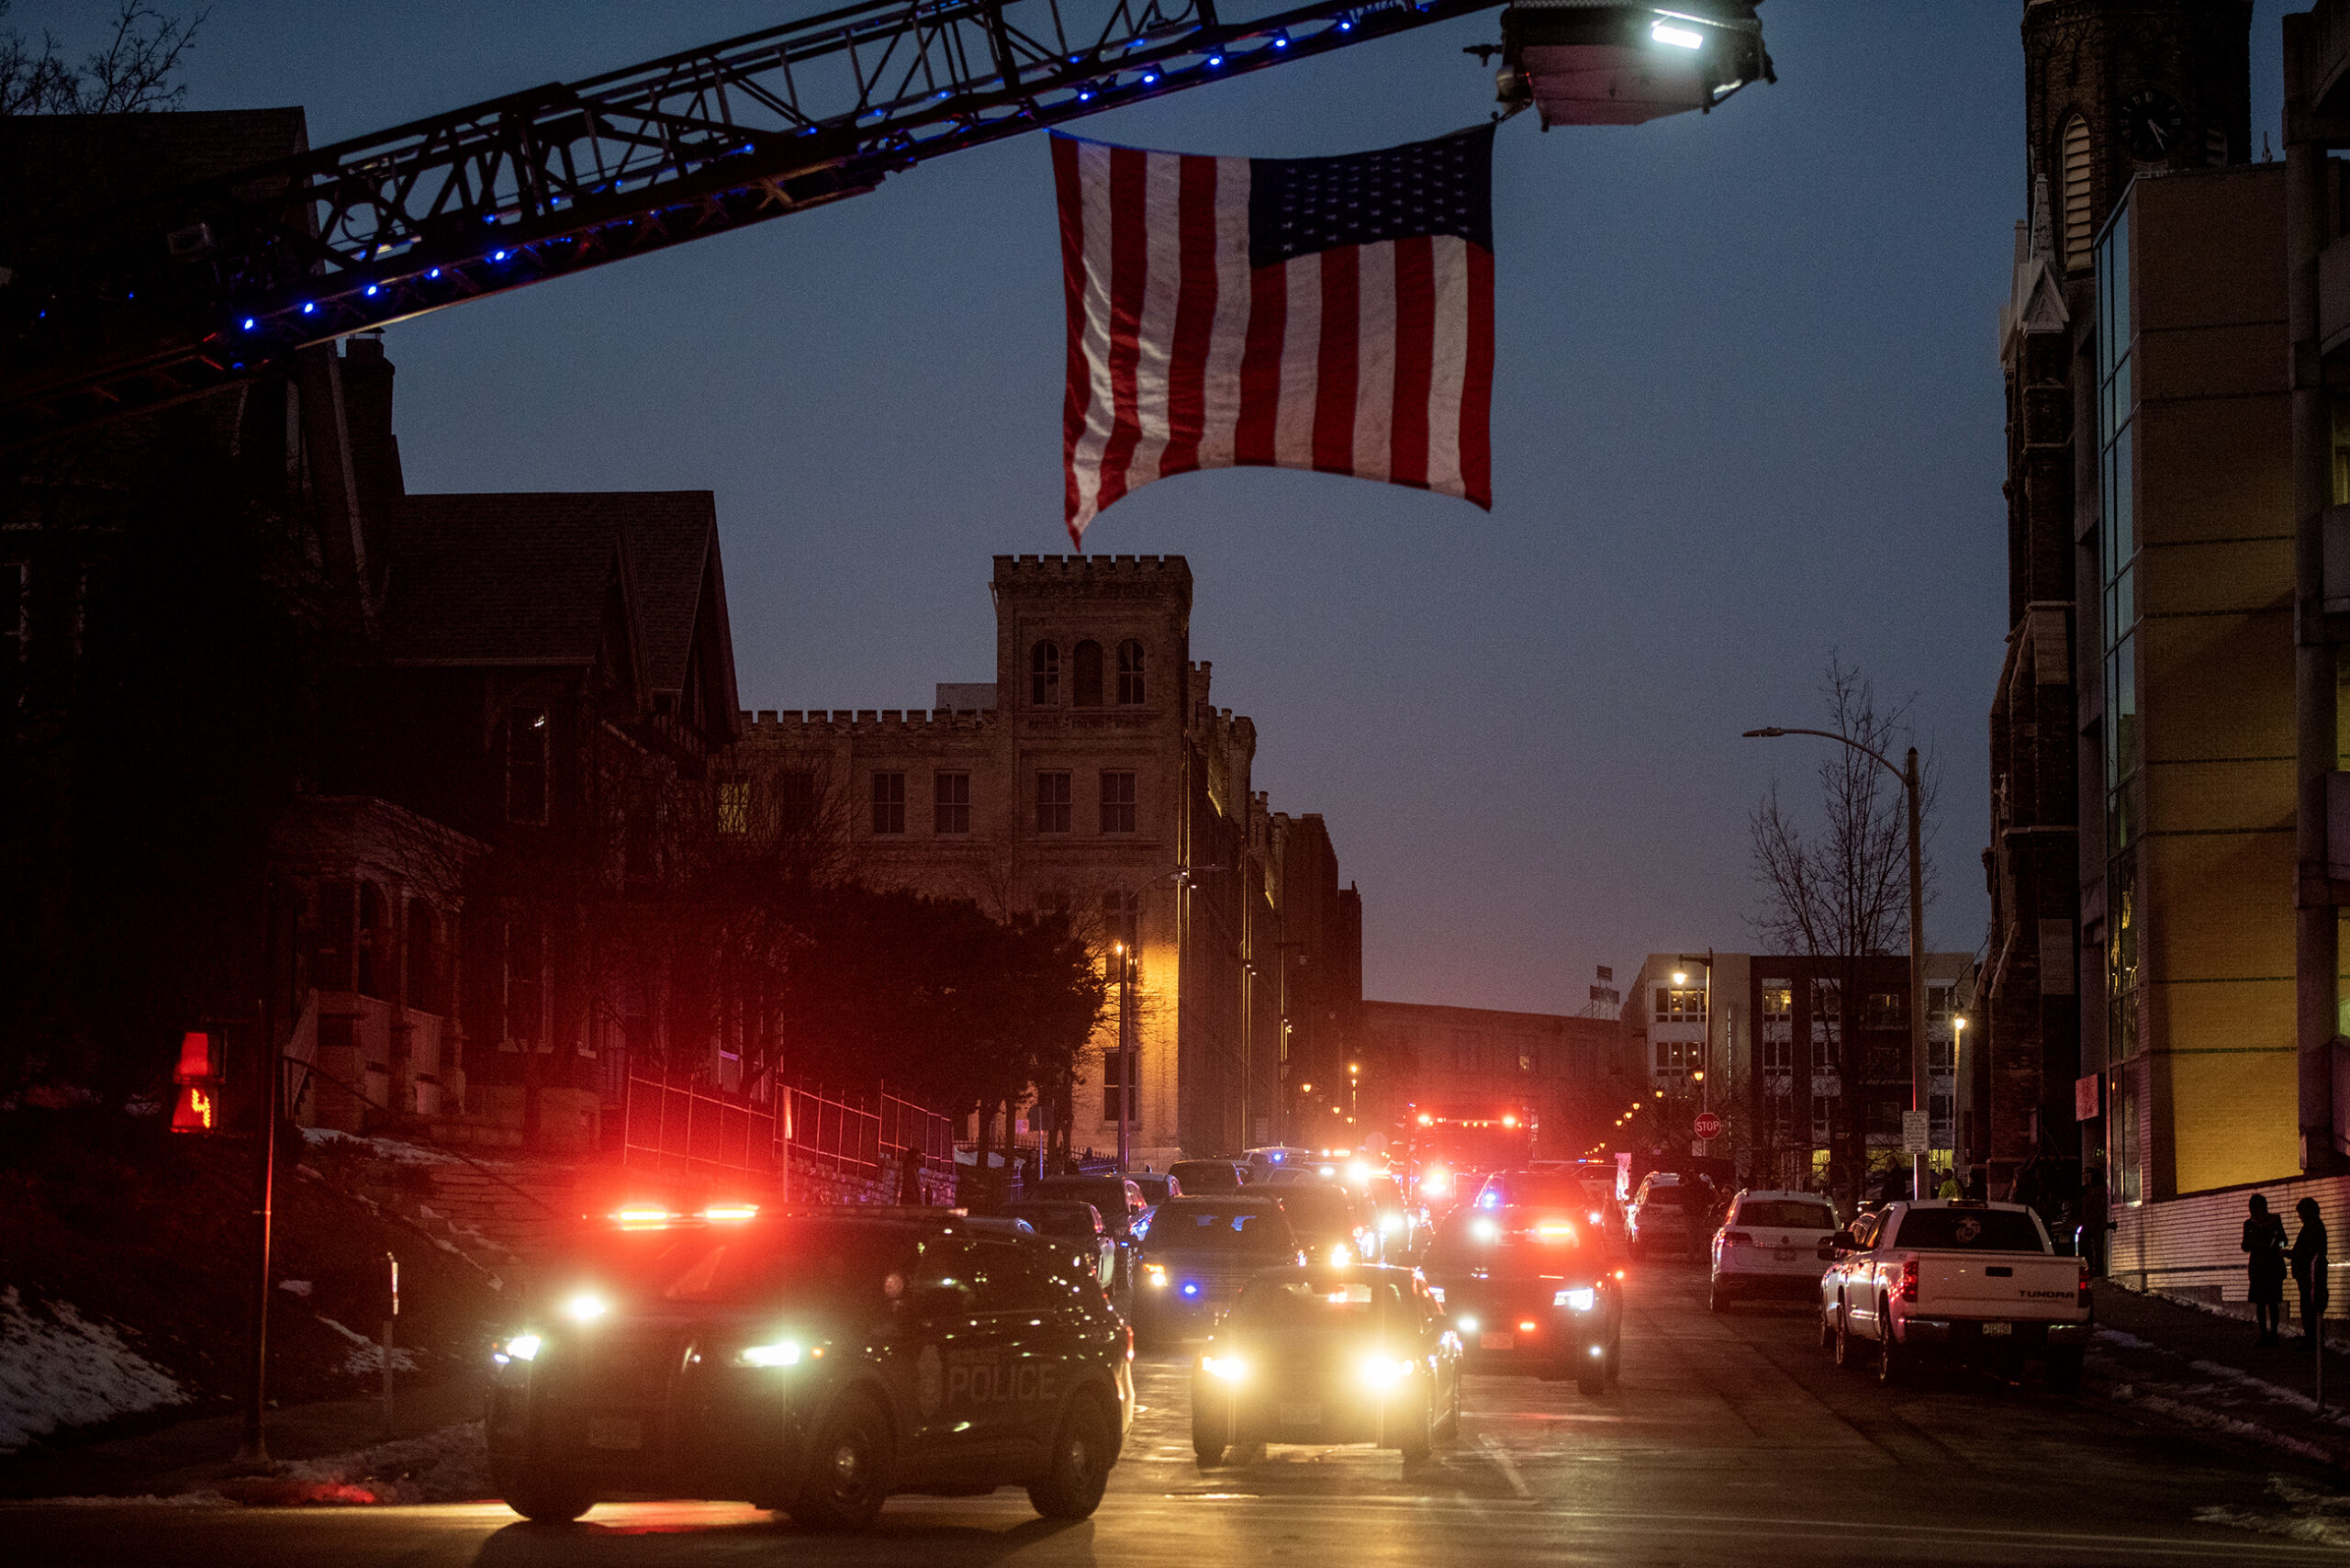 A U.S. flag hangs from a fire truck above the procession of police cars with lights on.